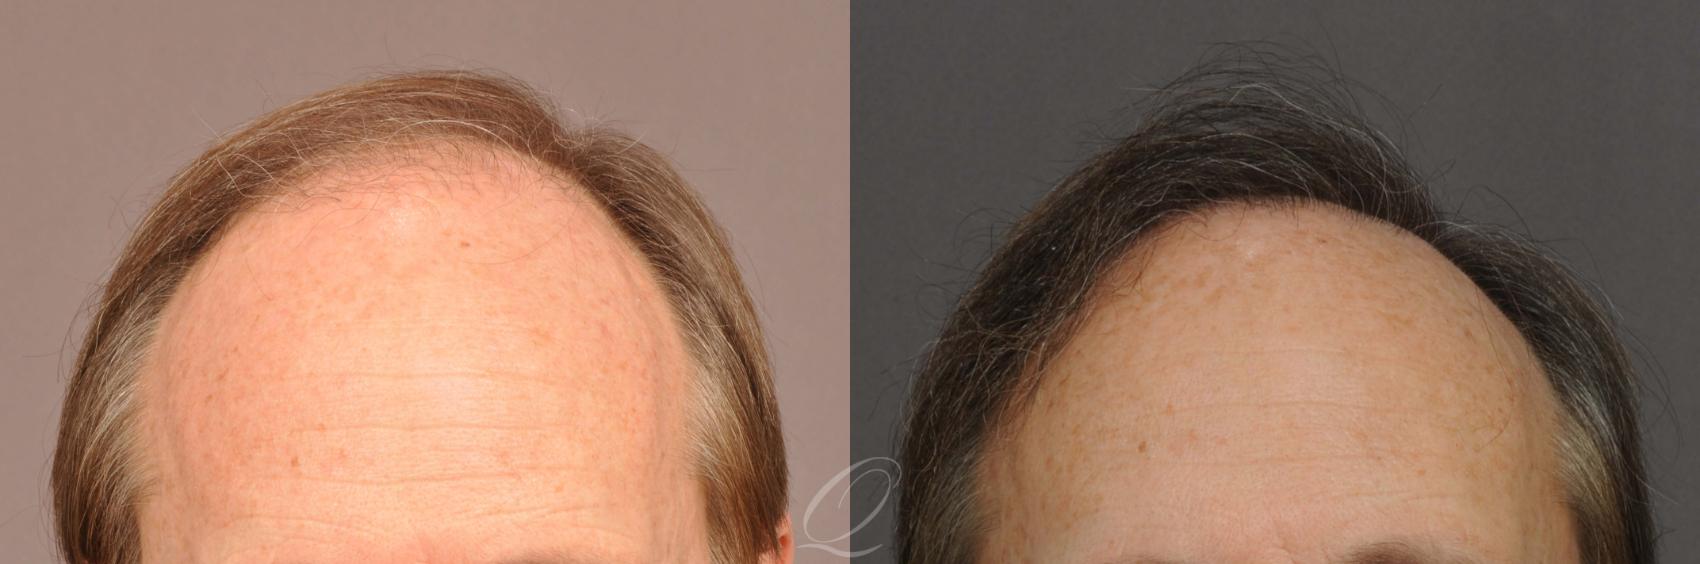 FUT Case 1021 Before & After View #1 | Rochester, Buffalo, & Syracuse, NY | Quatela Center for Hair Restoration